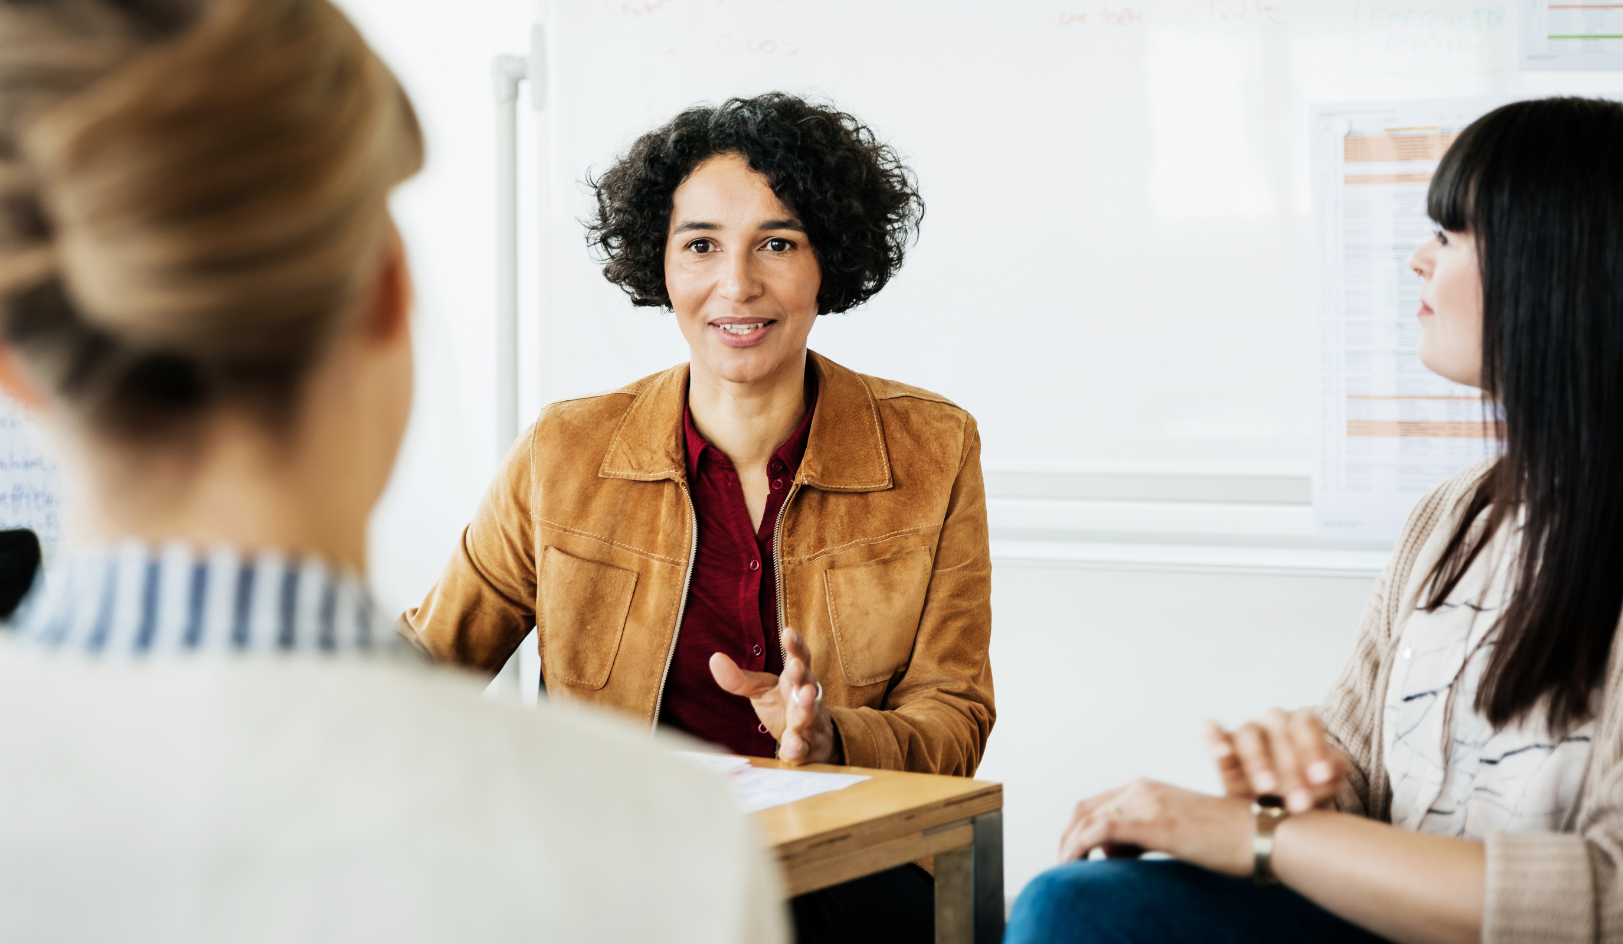 Middle aged woman in a conference room setting speaking with two other women.